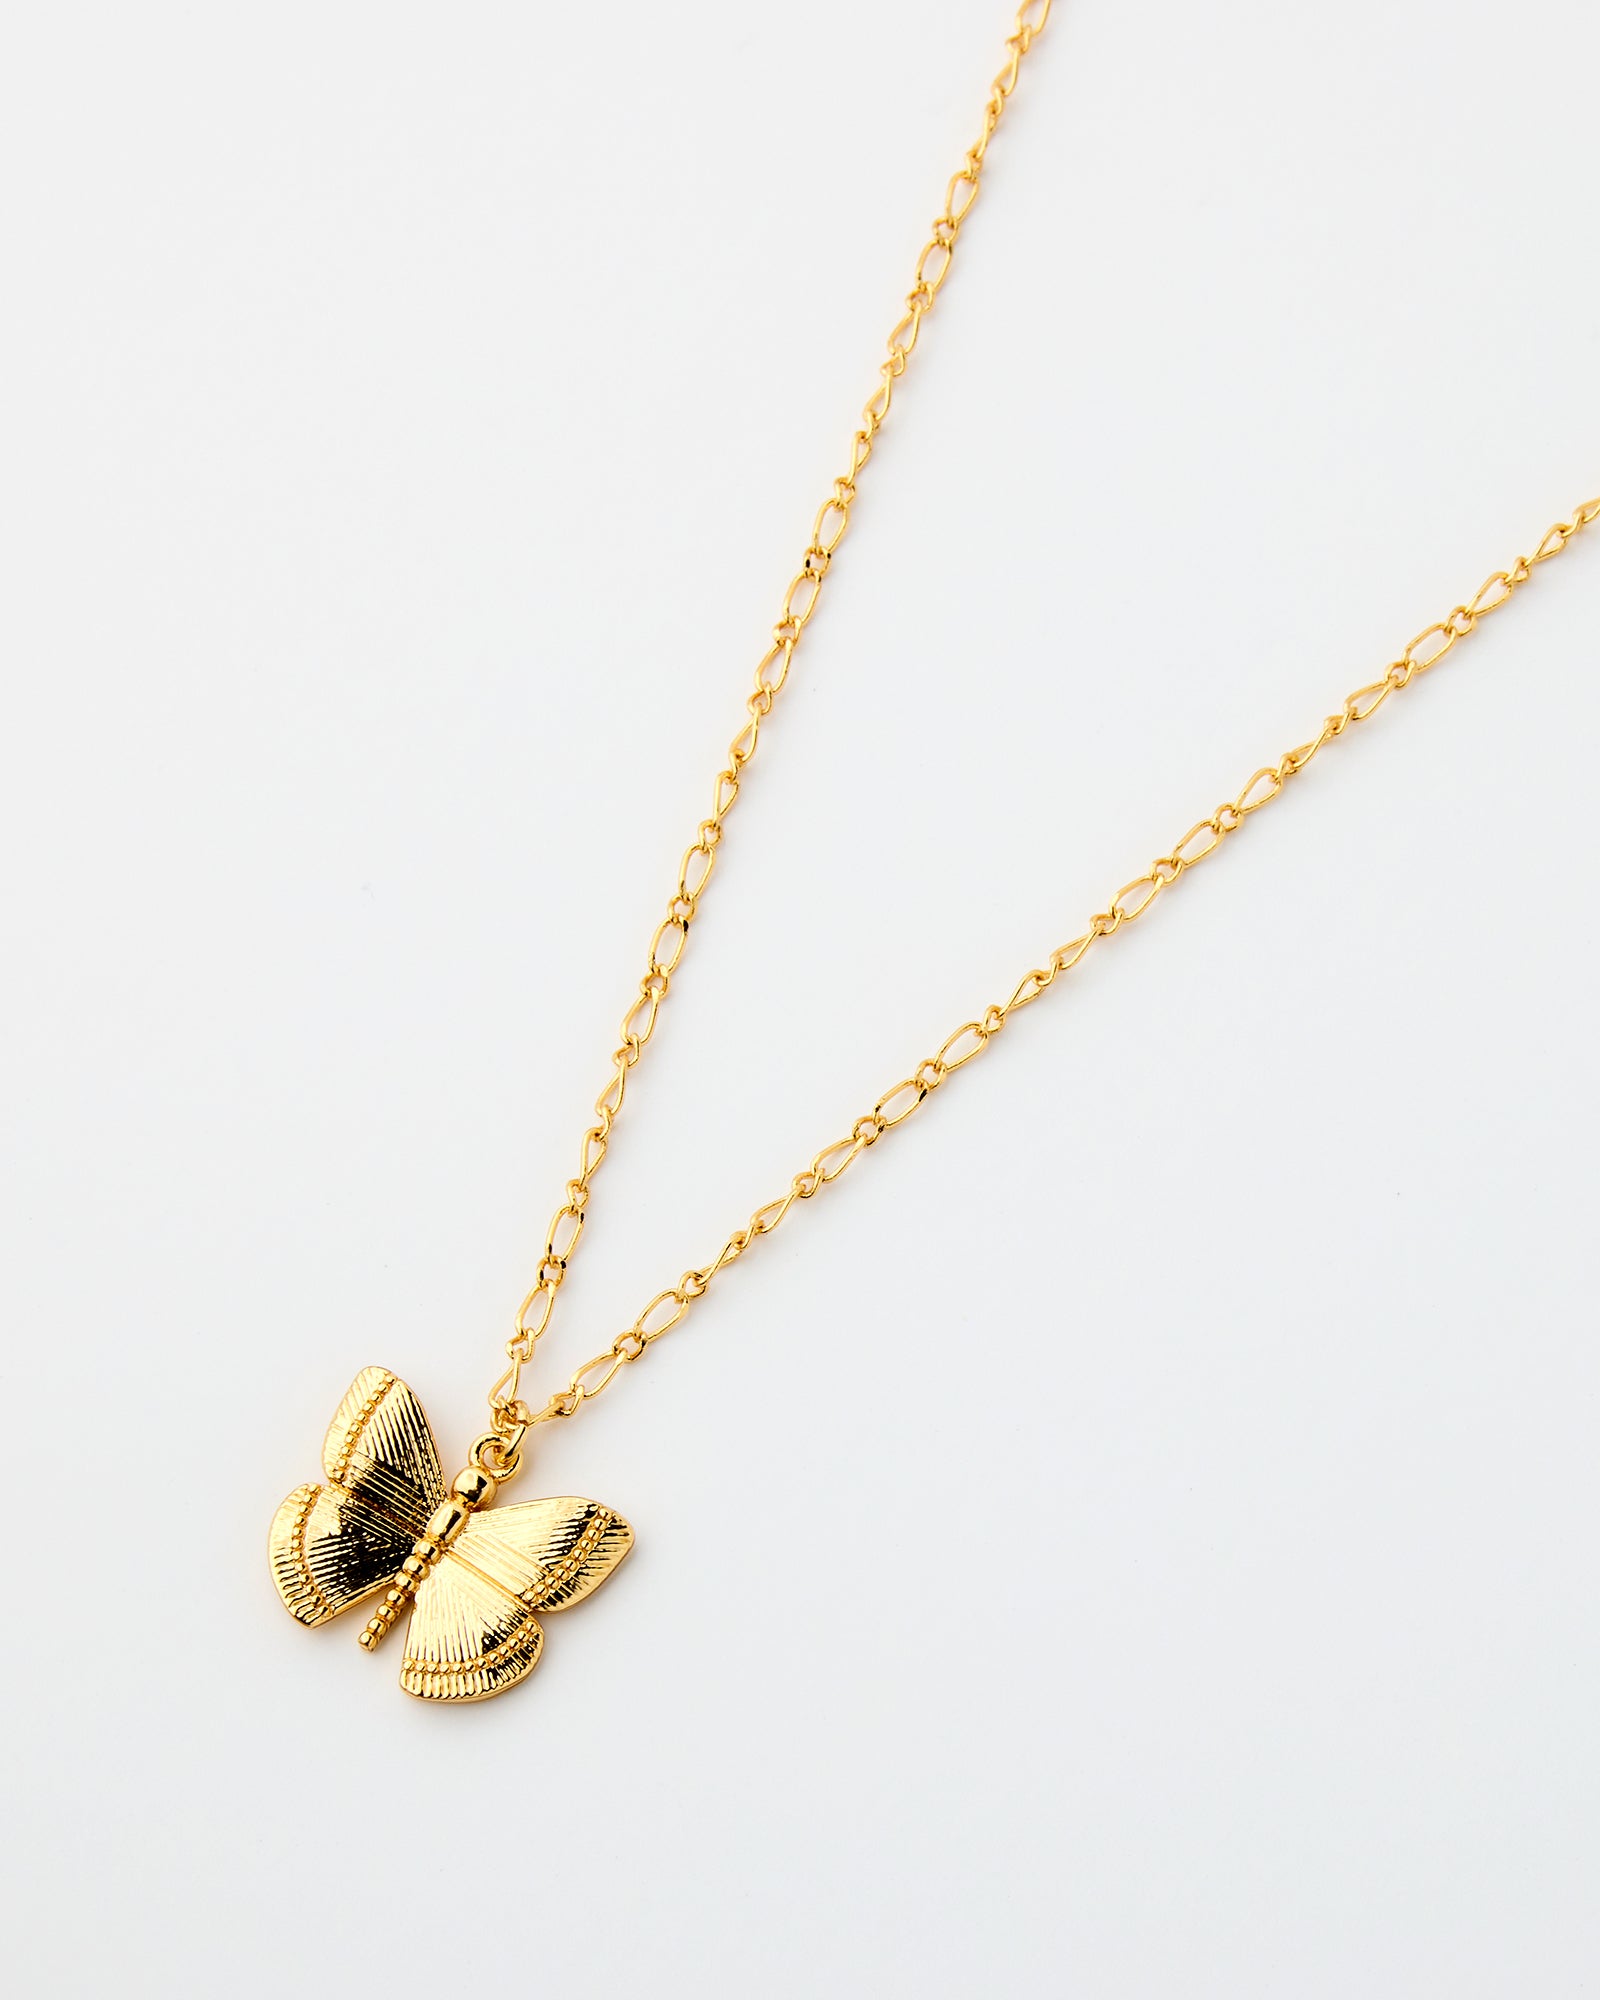 Butterfly charm on gold chain